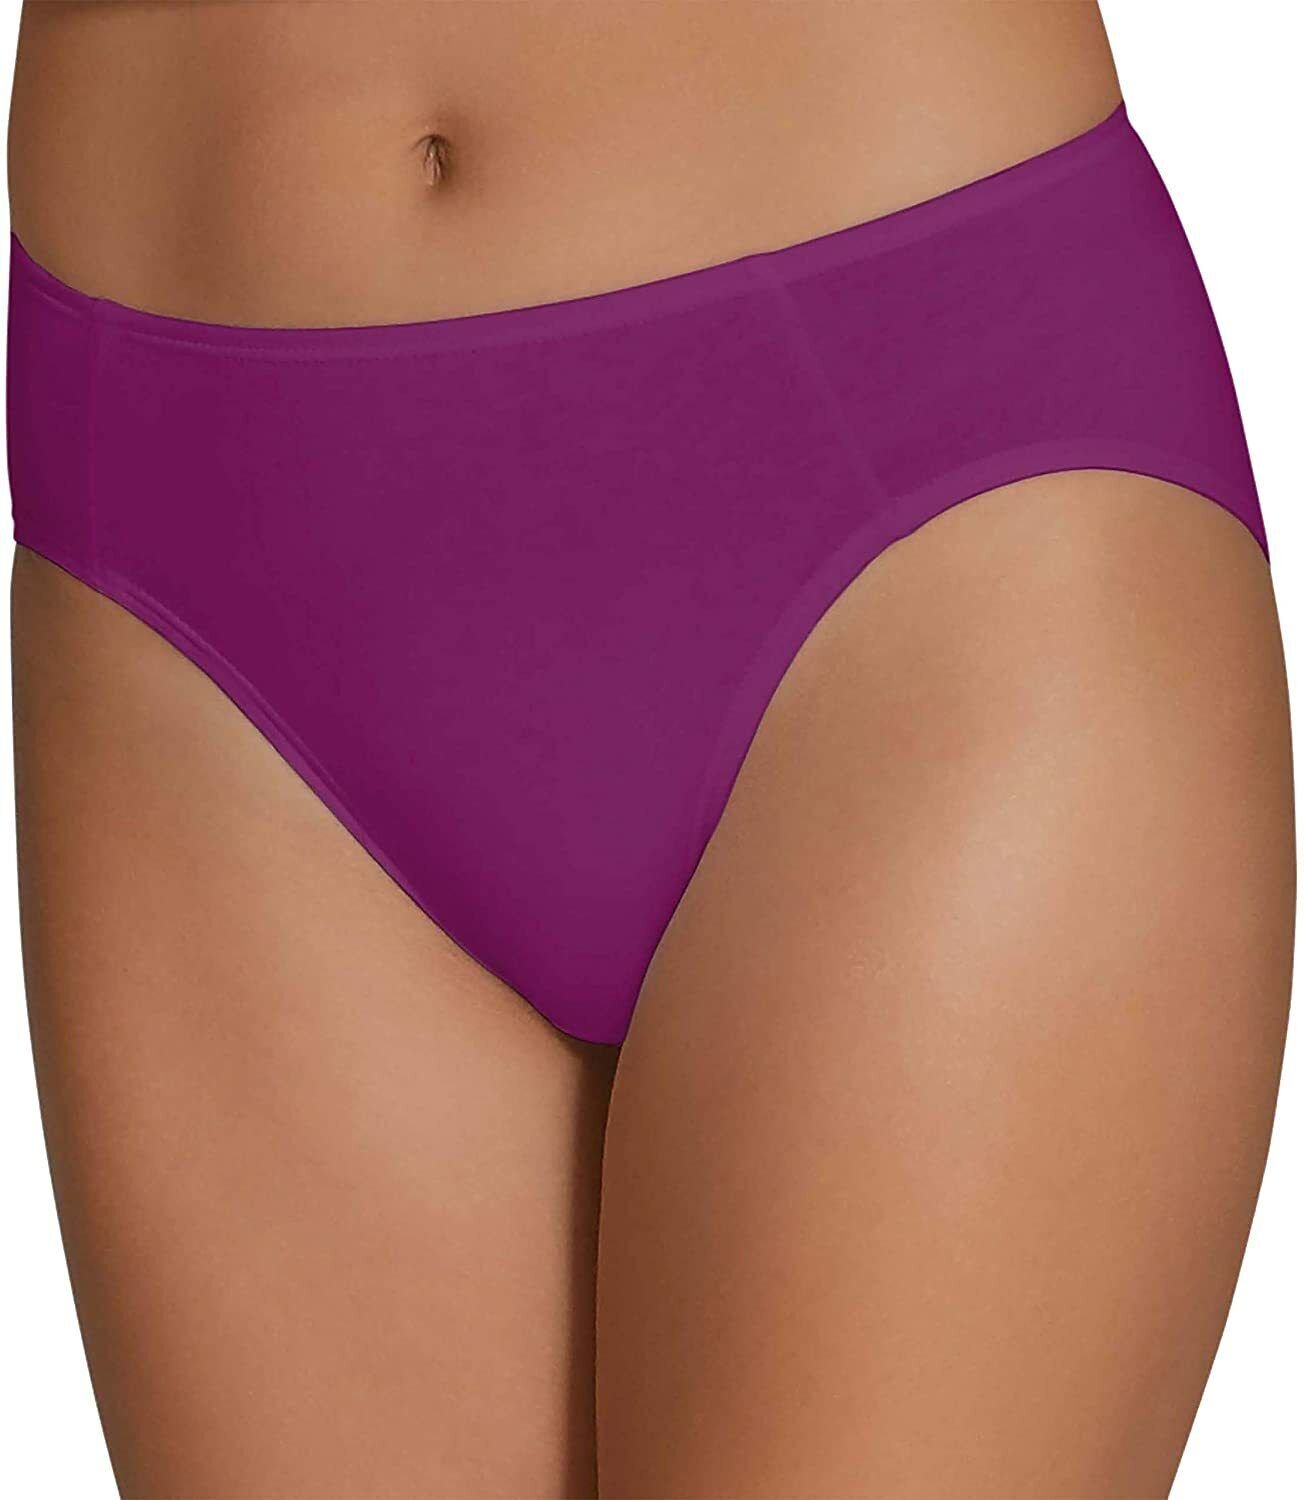 Fruit of the Loom Women's 6 Pack Underwear Cotton Stretch Panties